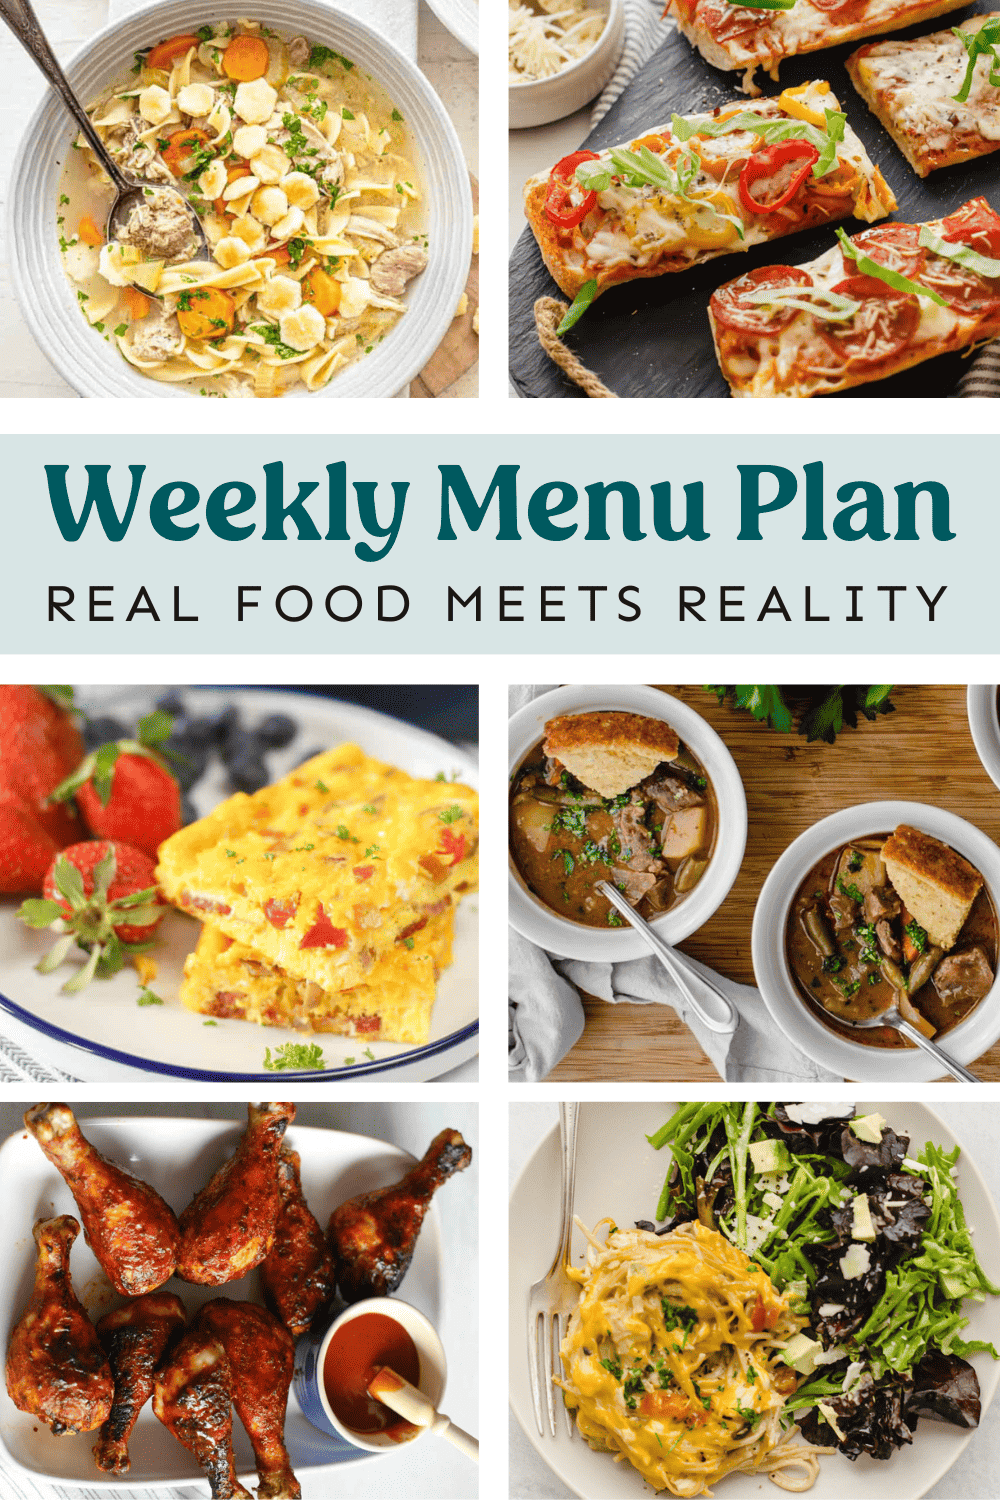 Collage of meals from the meal plan.